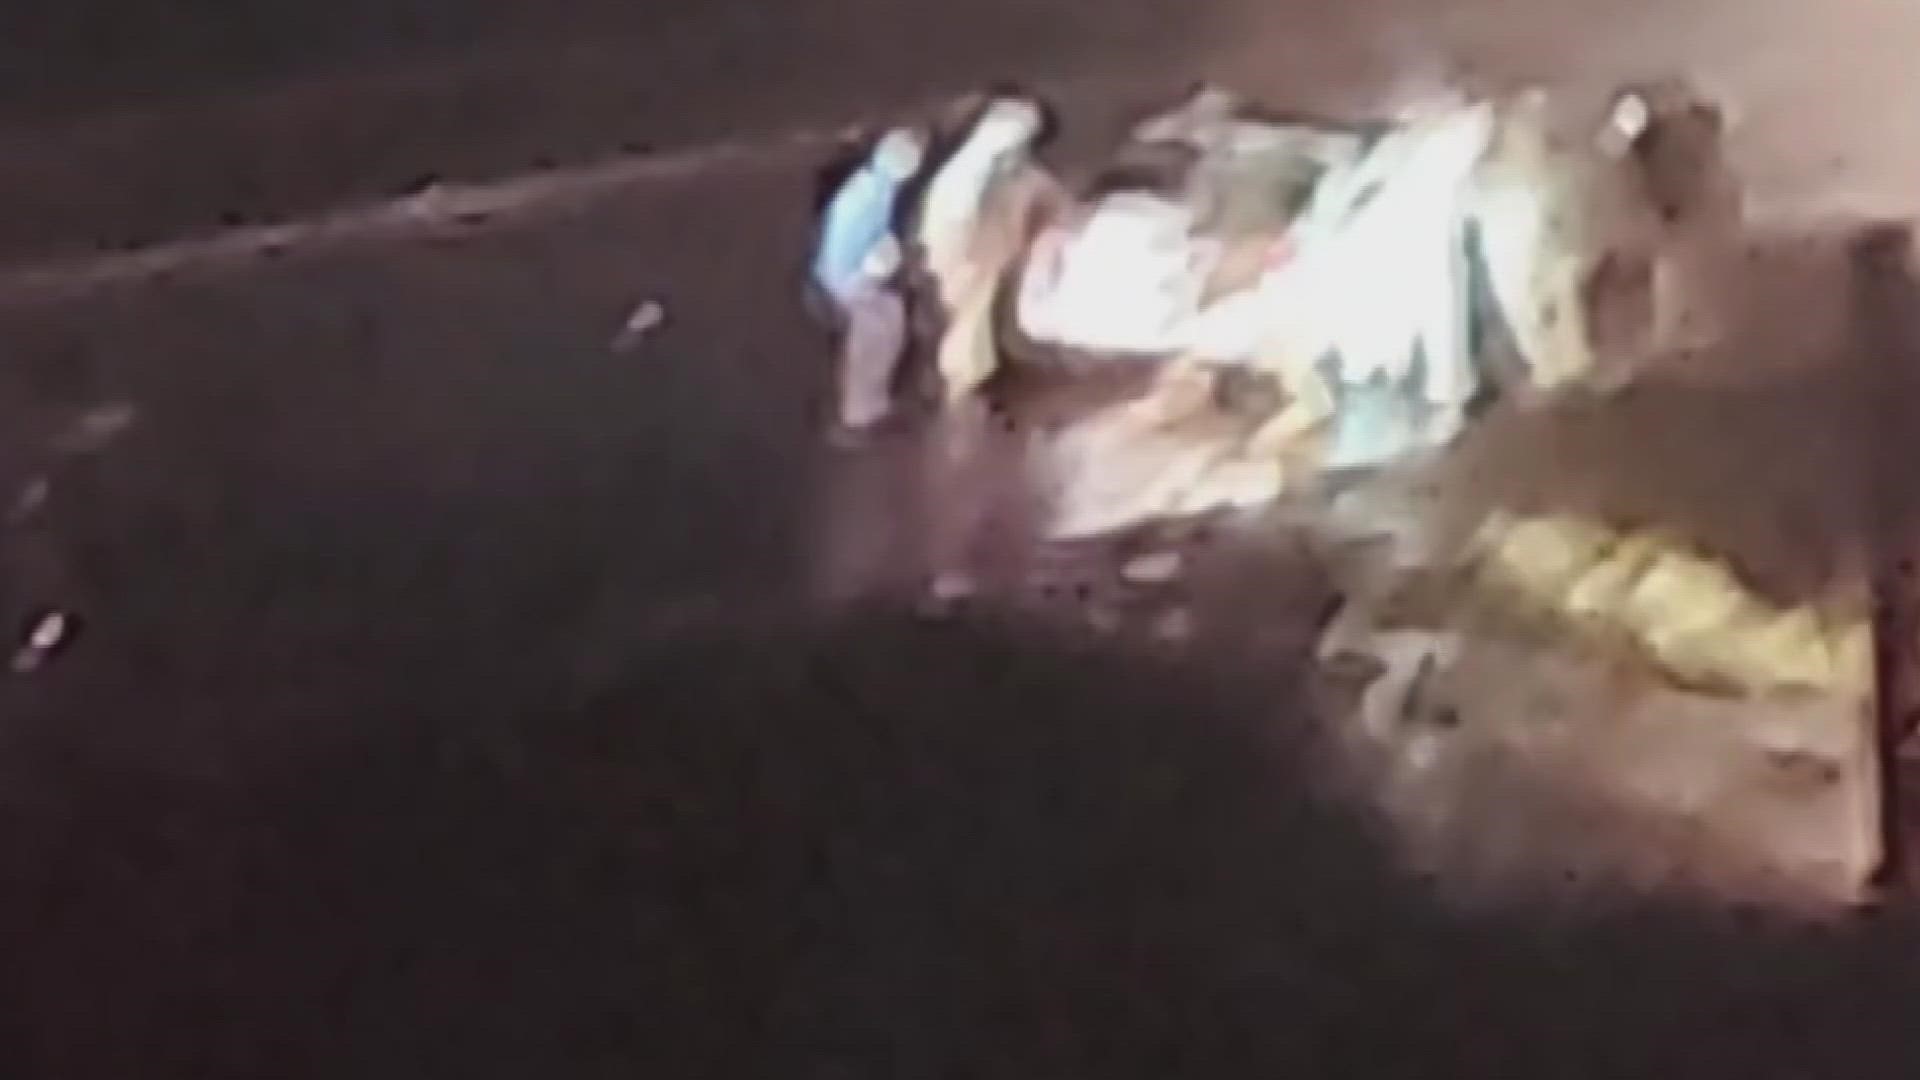 Viewer Danny Maddox shared a video that appears to show the moment authorities rescued the woman from the vehicle during the standoff on Highway 101 on March 3.